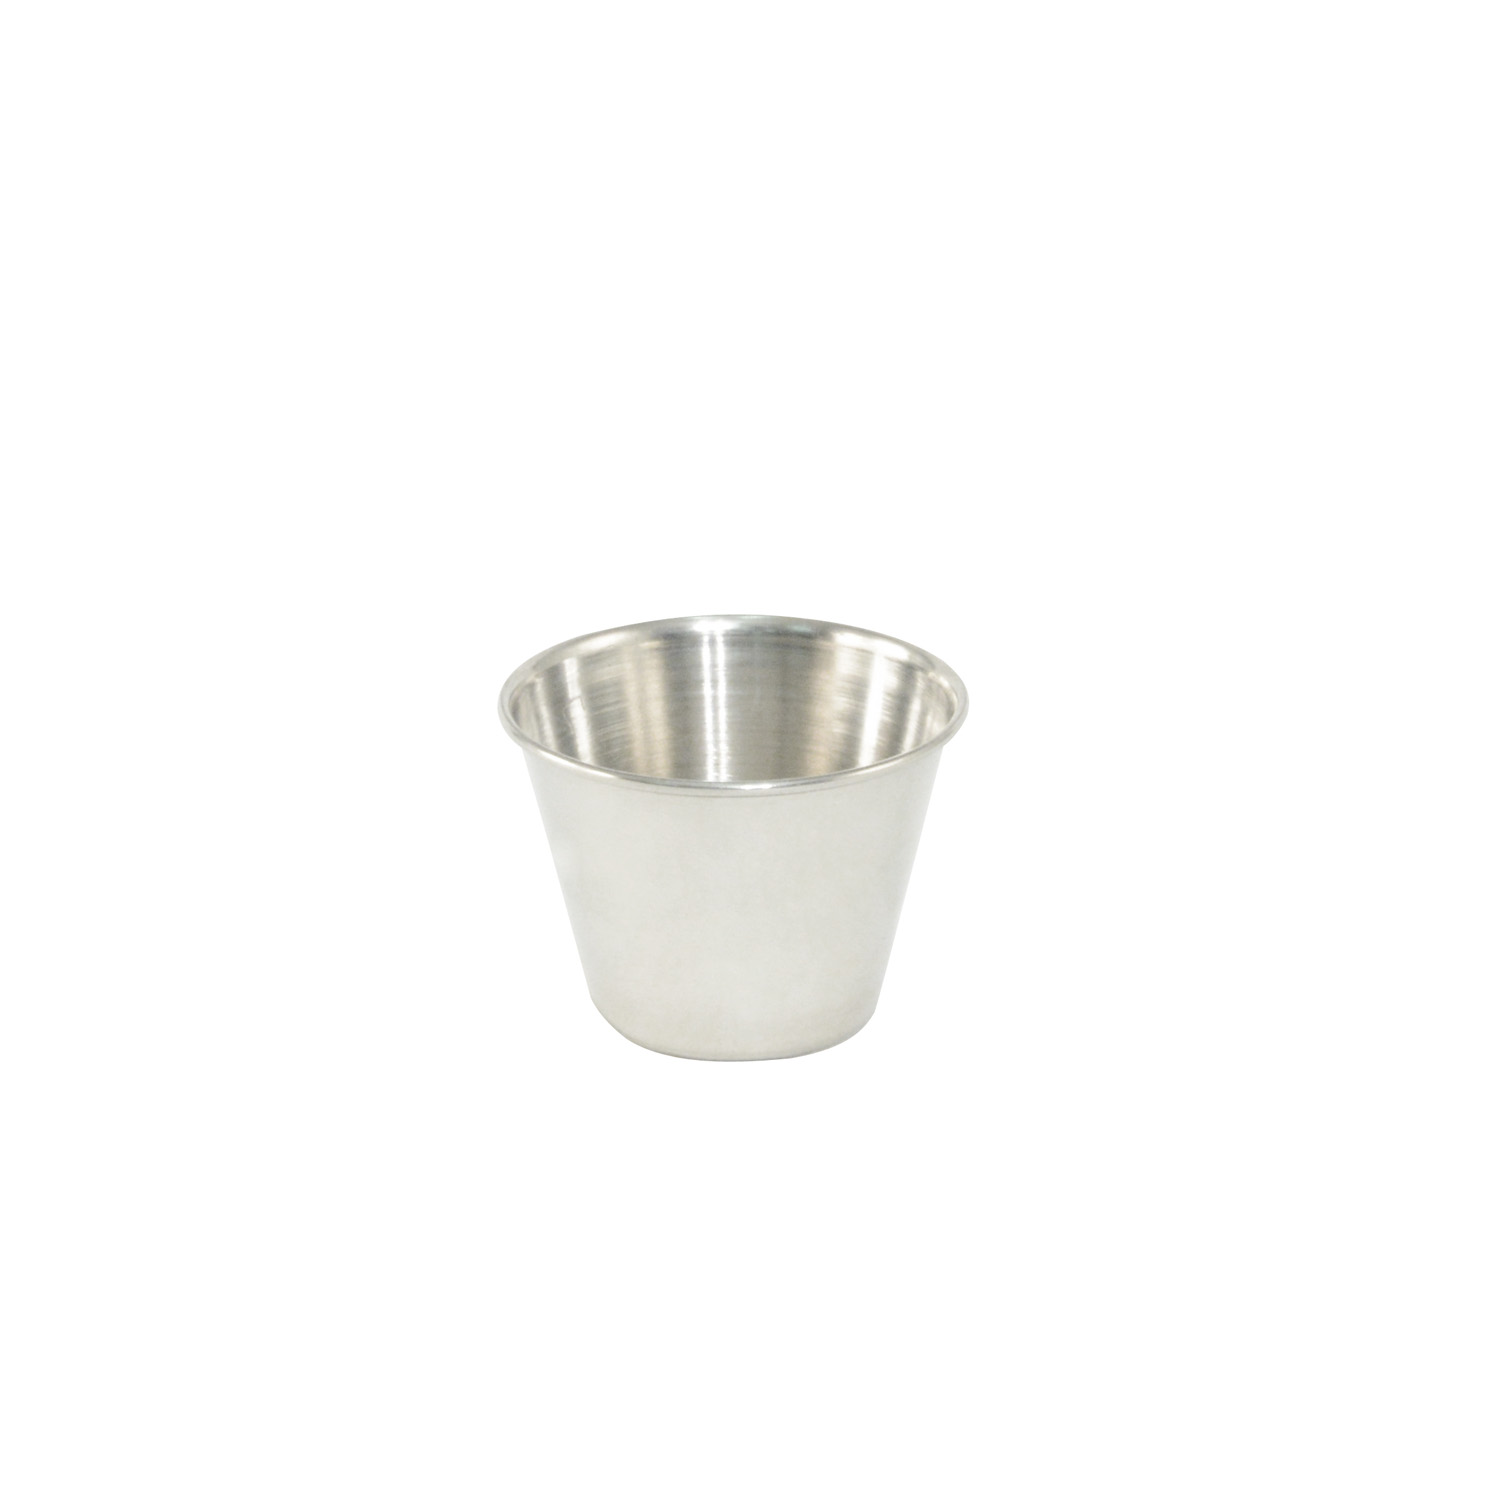 CAC China SSCP-25 Stainless Steel Sauce Cup 2.5oz - 1 dozen